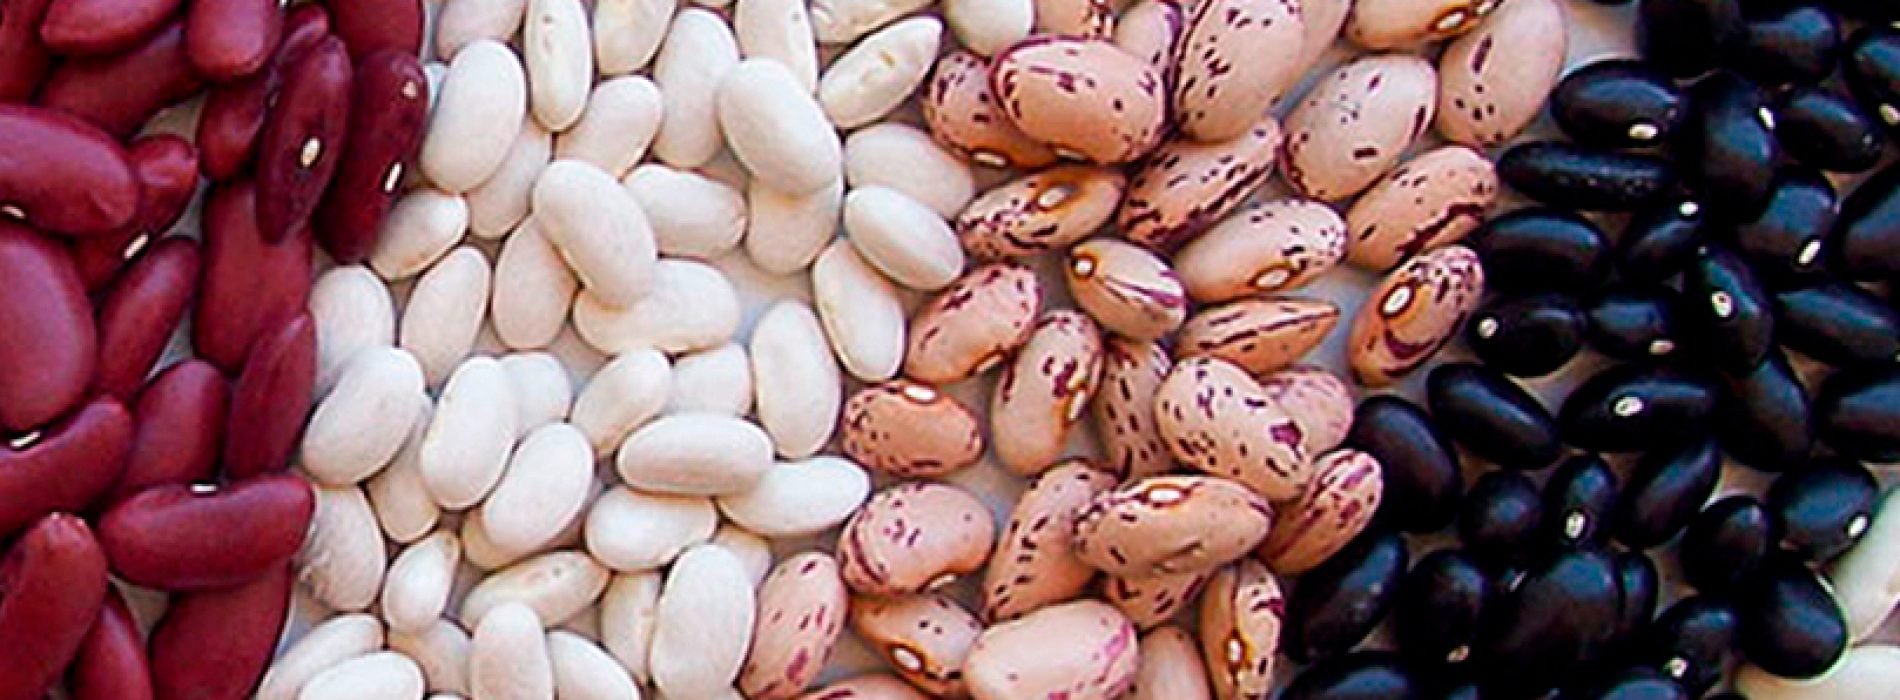 Beans: revitalizing an ancestral and healthy food consumption